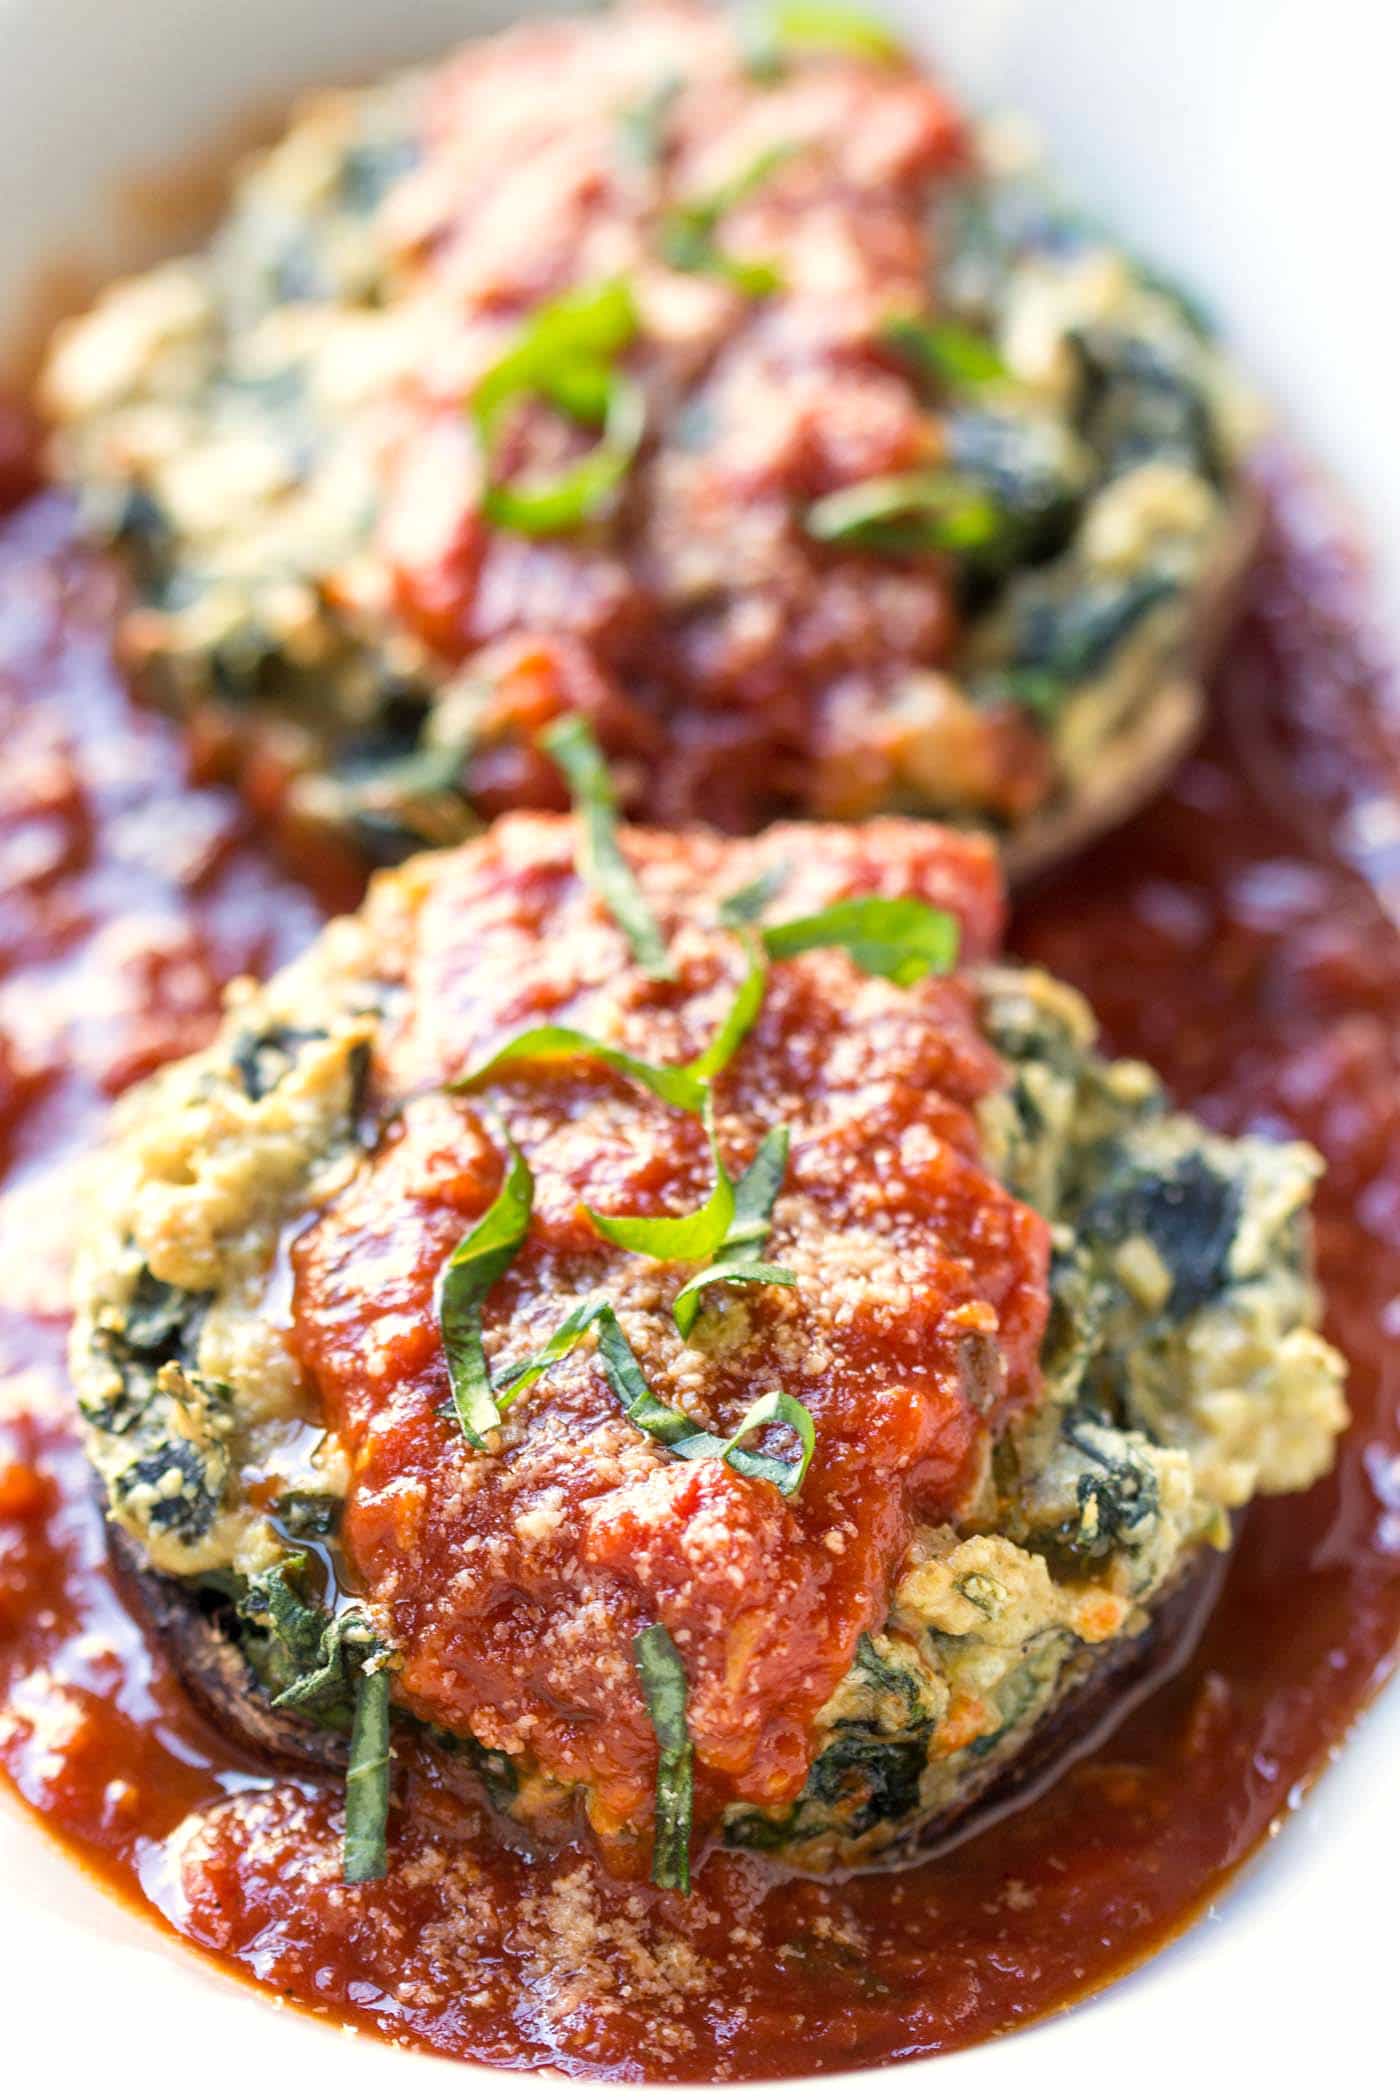 Vegan Ricotta + Quinoa Stuffed Mushrooms with spinach, garlic and tomato sauce -- the perfect meatless meal!